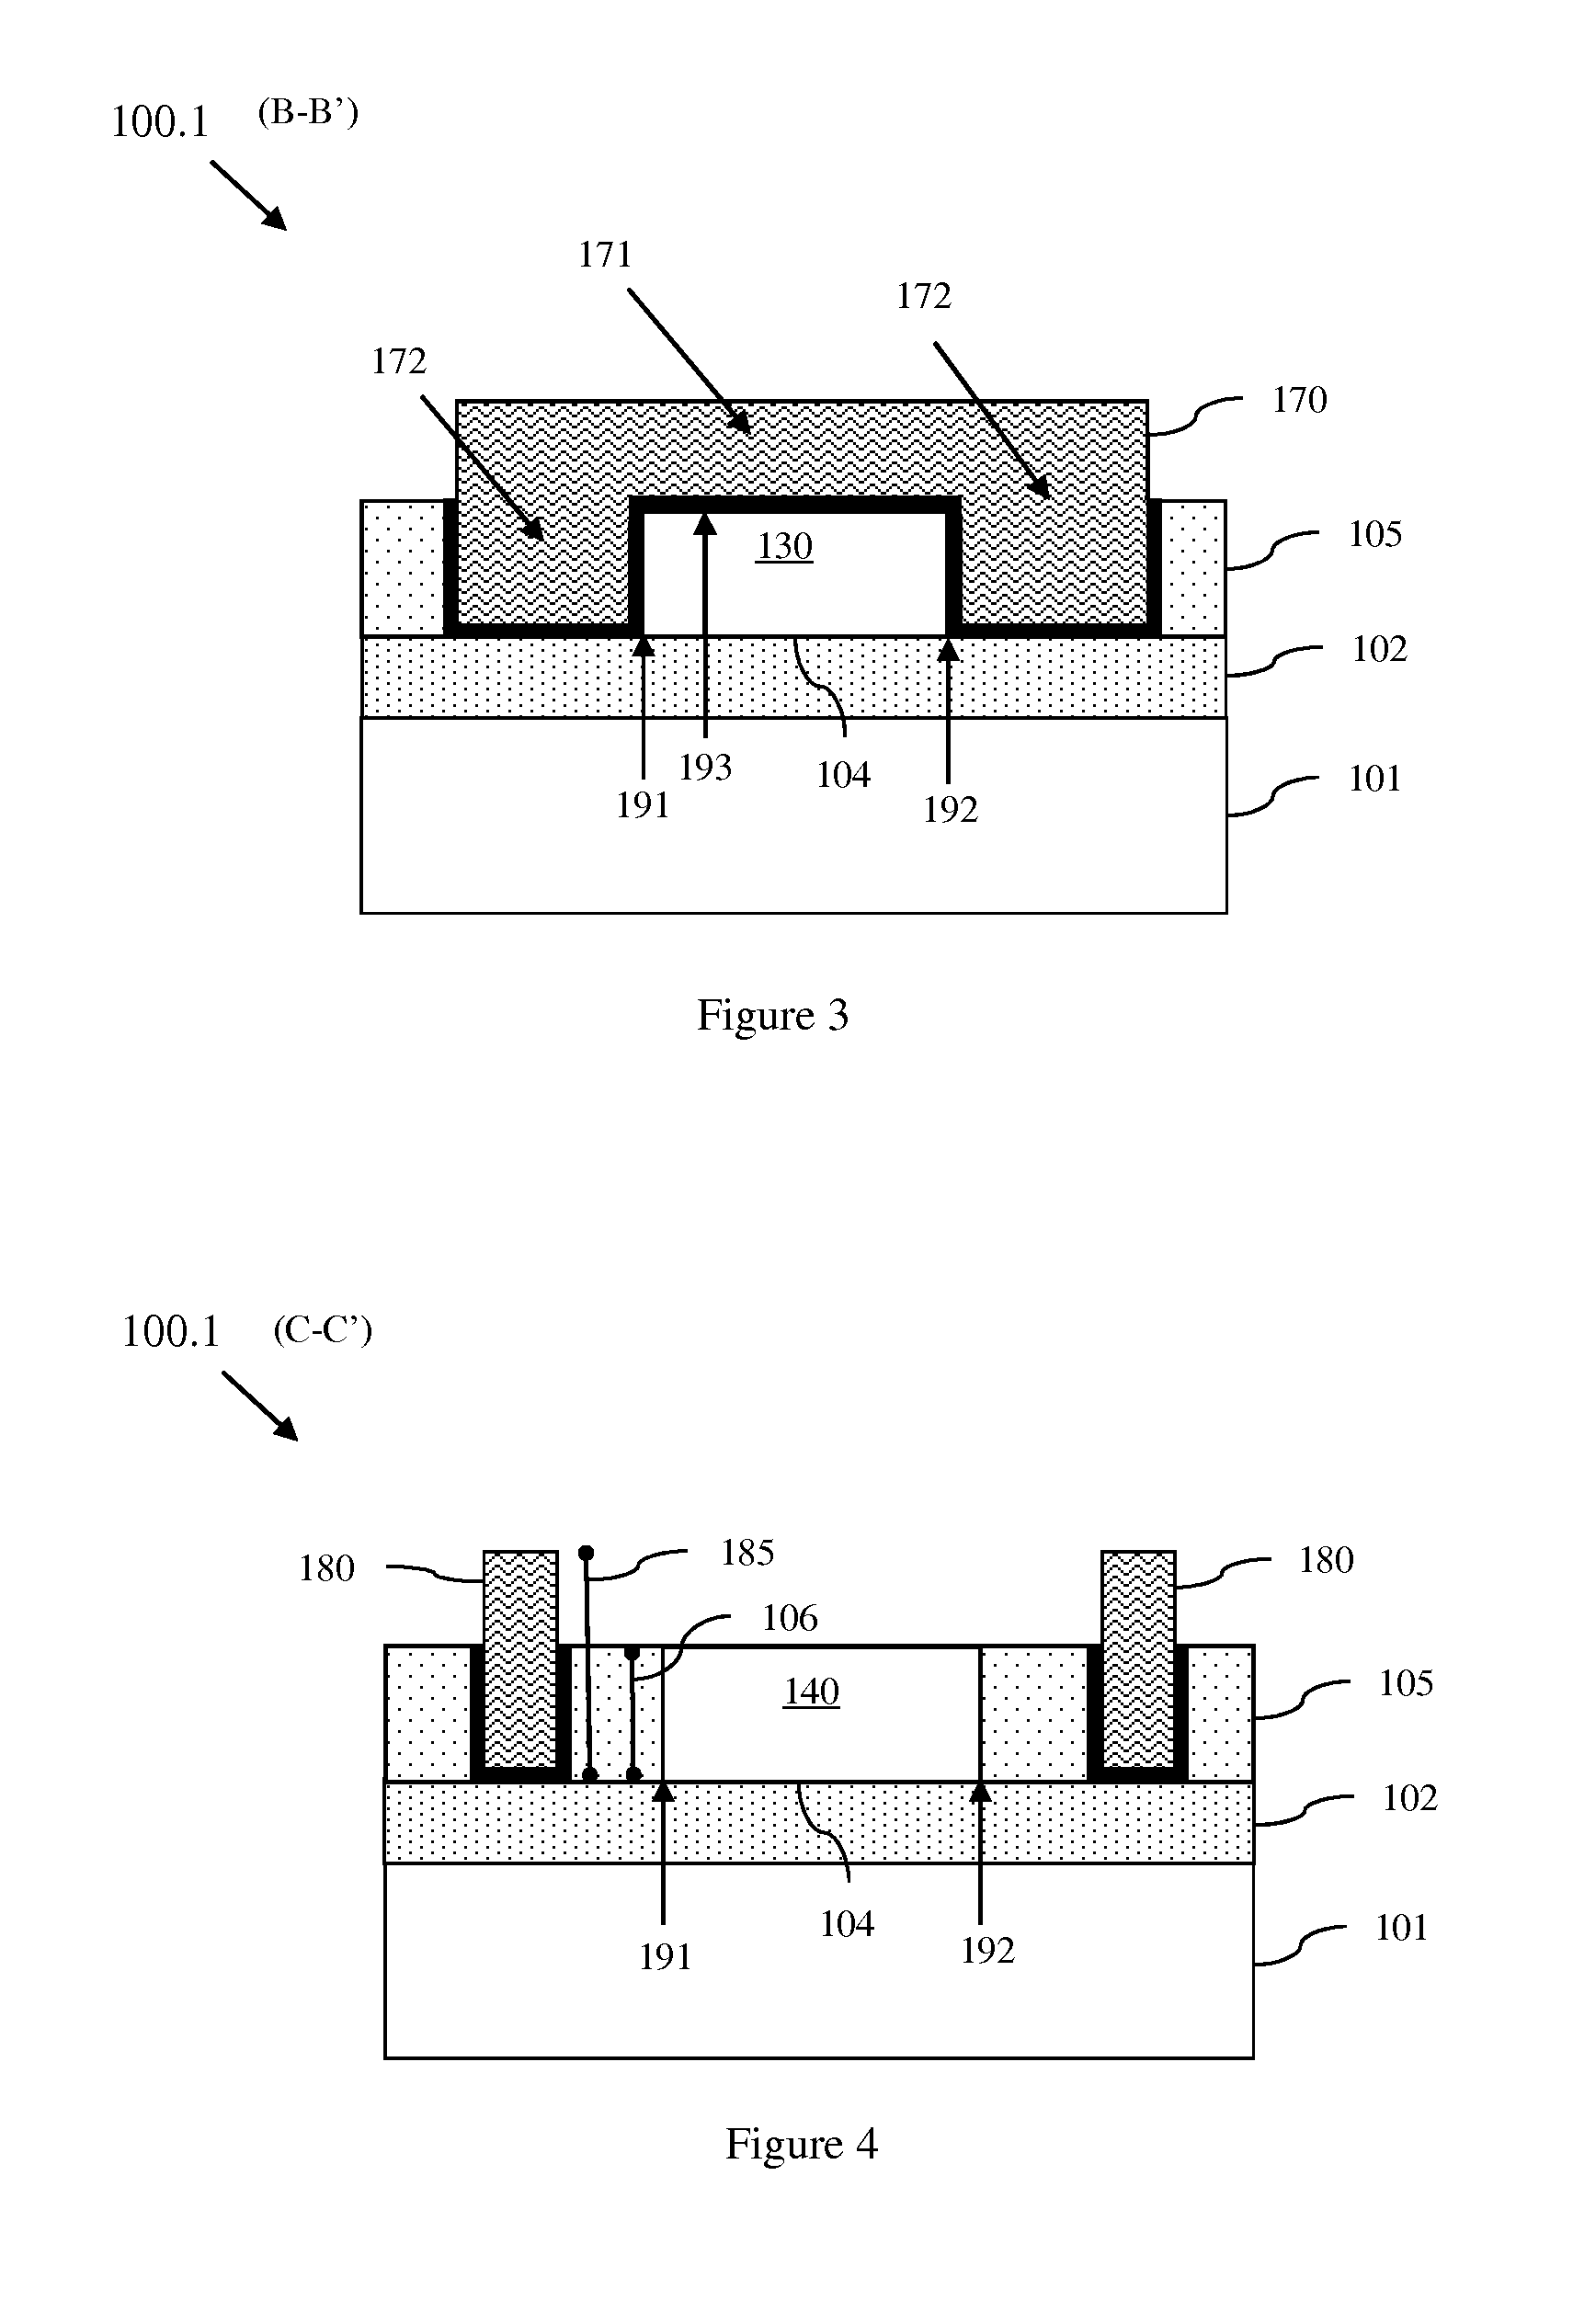 LATERAL EXTENDED DRAIN METAL OXIDE SEMICONDUCTOR FIELD EFFECT TRANSISTOR (LEDMOSFET) HAVING A HIGH DRAIN-TO-BODY BREAKDOWN VOLTAGE (Vb), A METHOD OF FORMING AN LEDMOSFET, AND A SILICON-CONTROLLED RECTIFIER (SCR) INCORPORATING A COMPLEMENTARY PAIR OF LEDMOSFETS